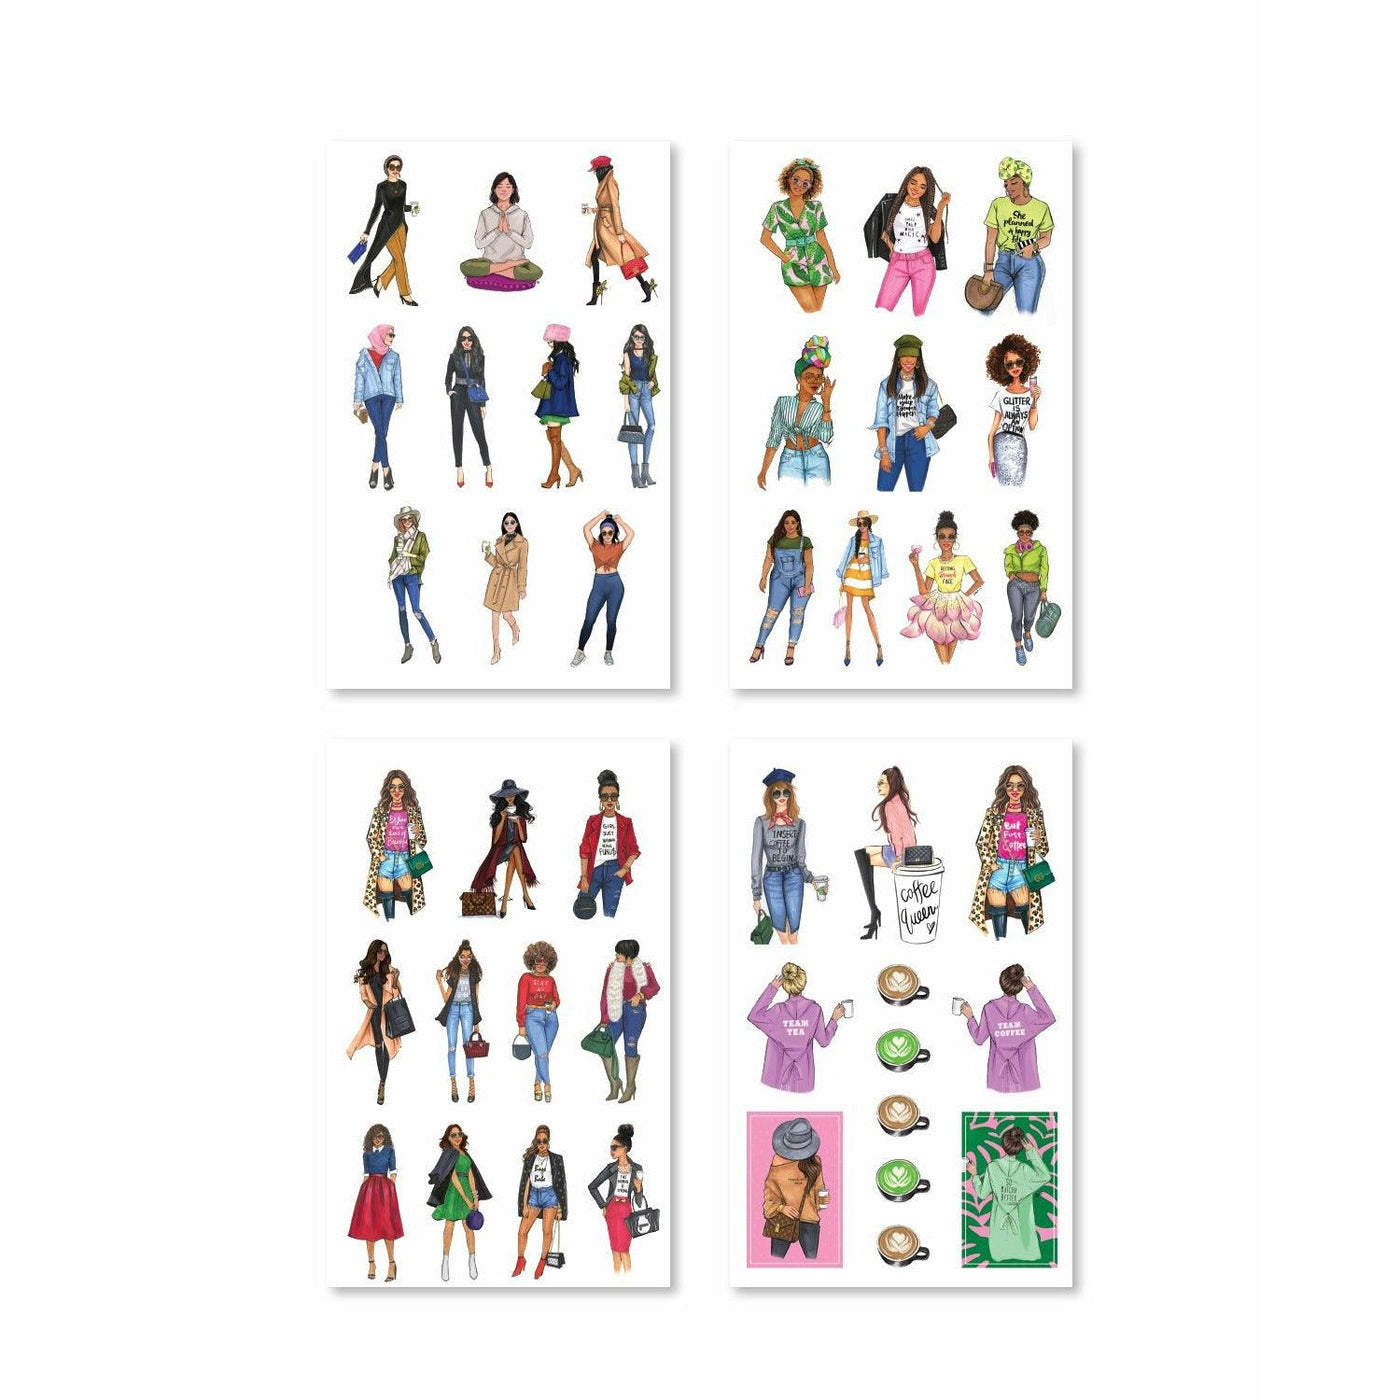 Fashionista Girls Sticker Book Page 2 by Rongrong DeVoe